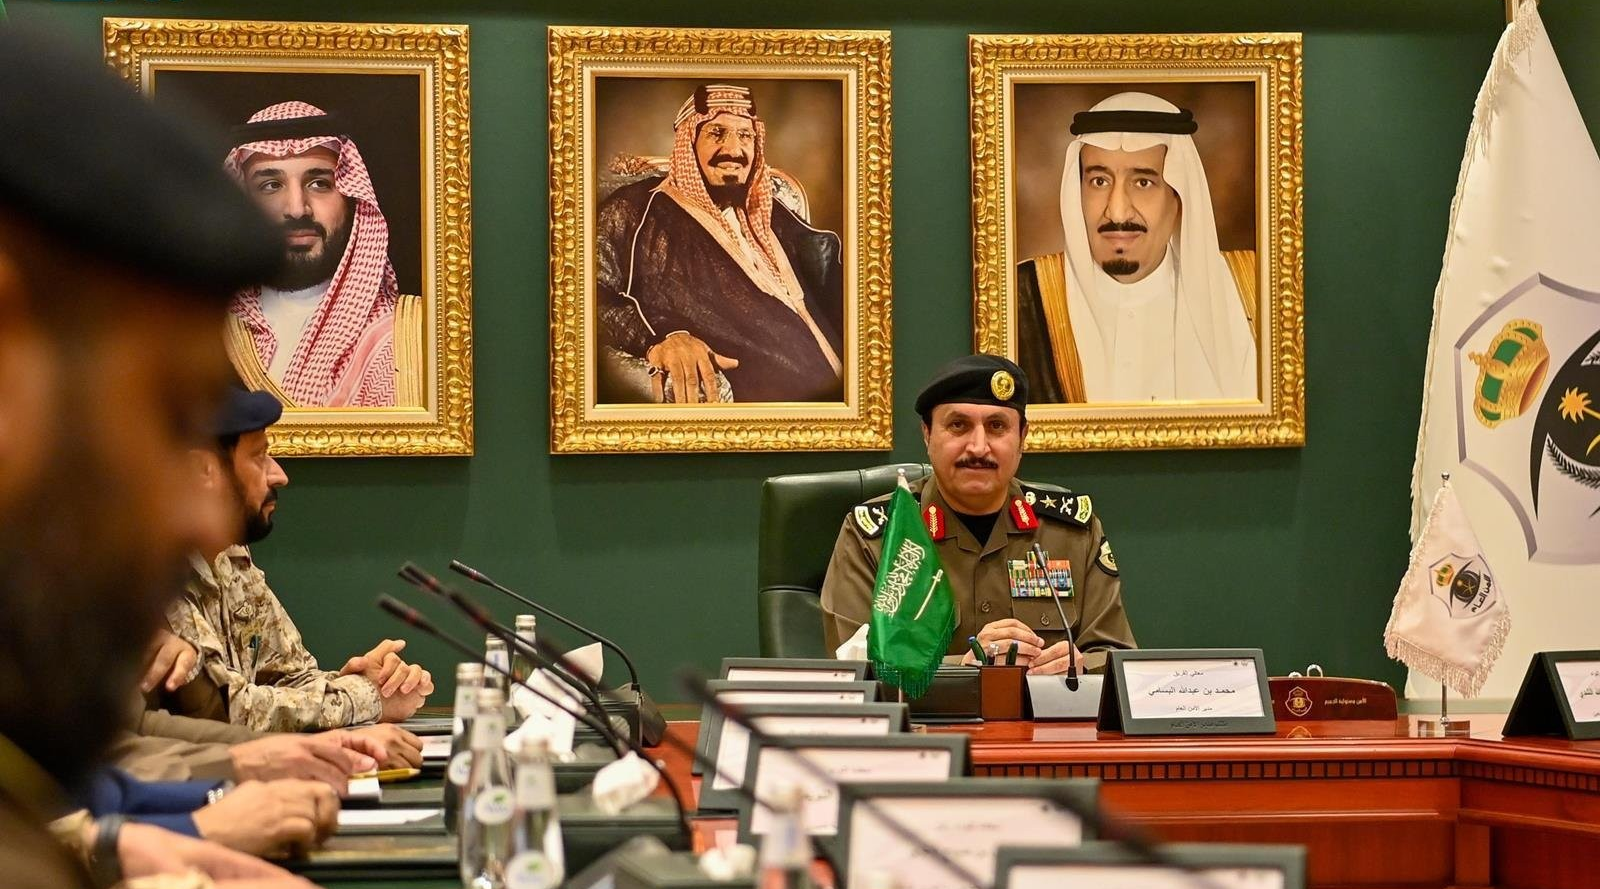 Director of Public Security Chairs the Security Committee Meeting for the Hajj